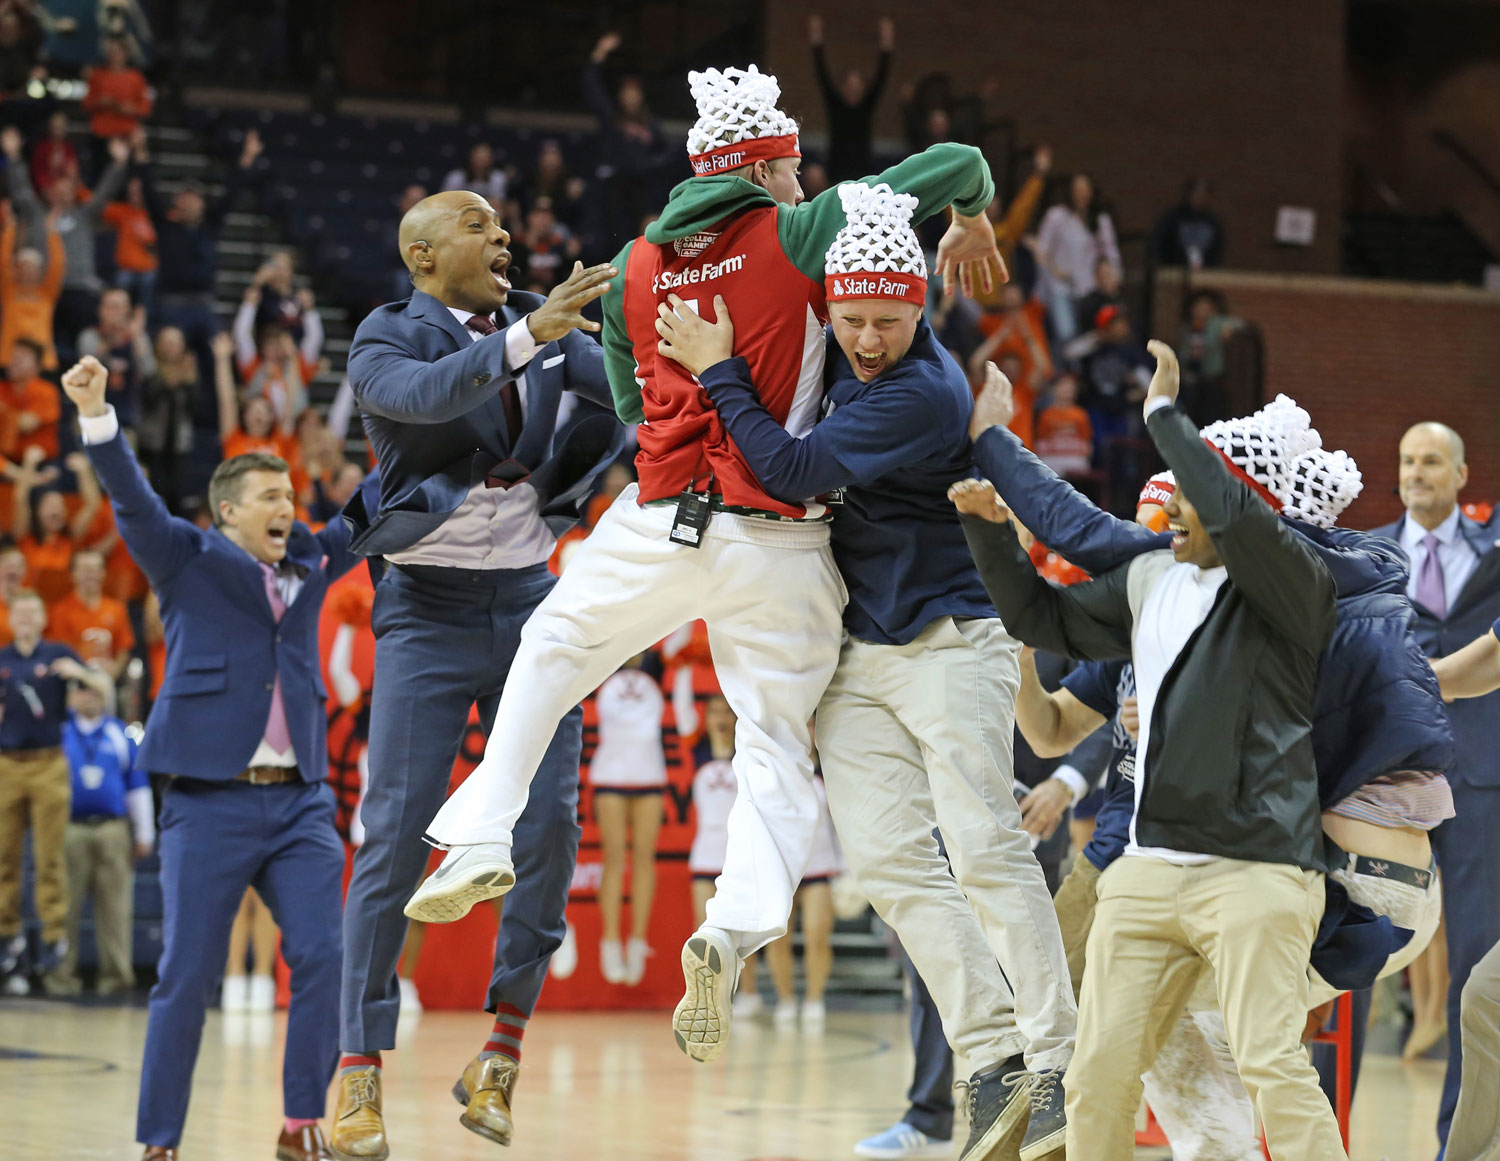 Angus Binnie (center) and others celebrate after making last year’s half-court shot